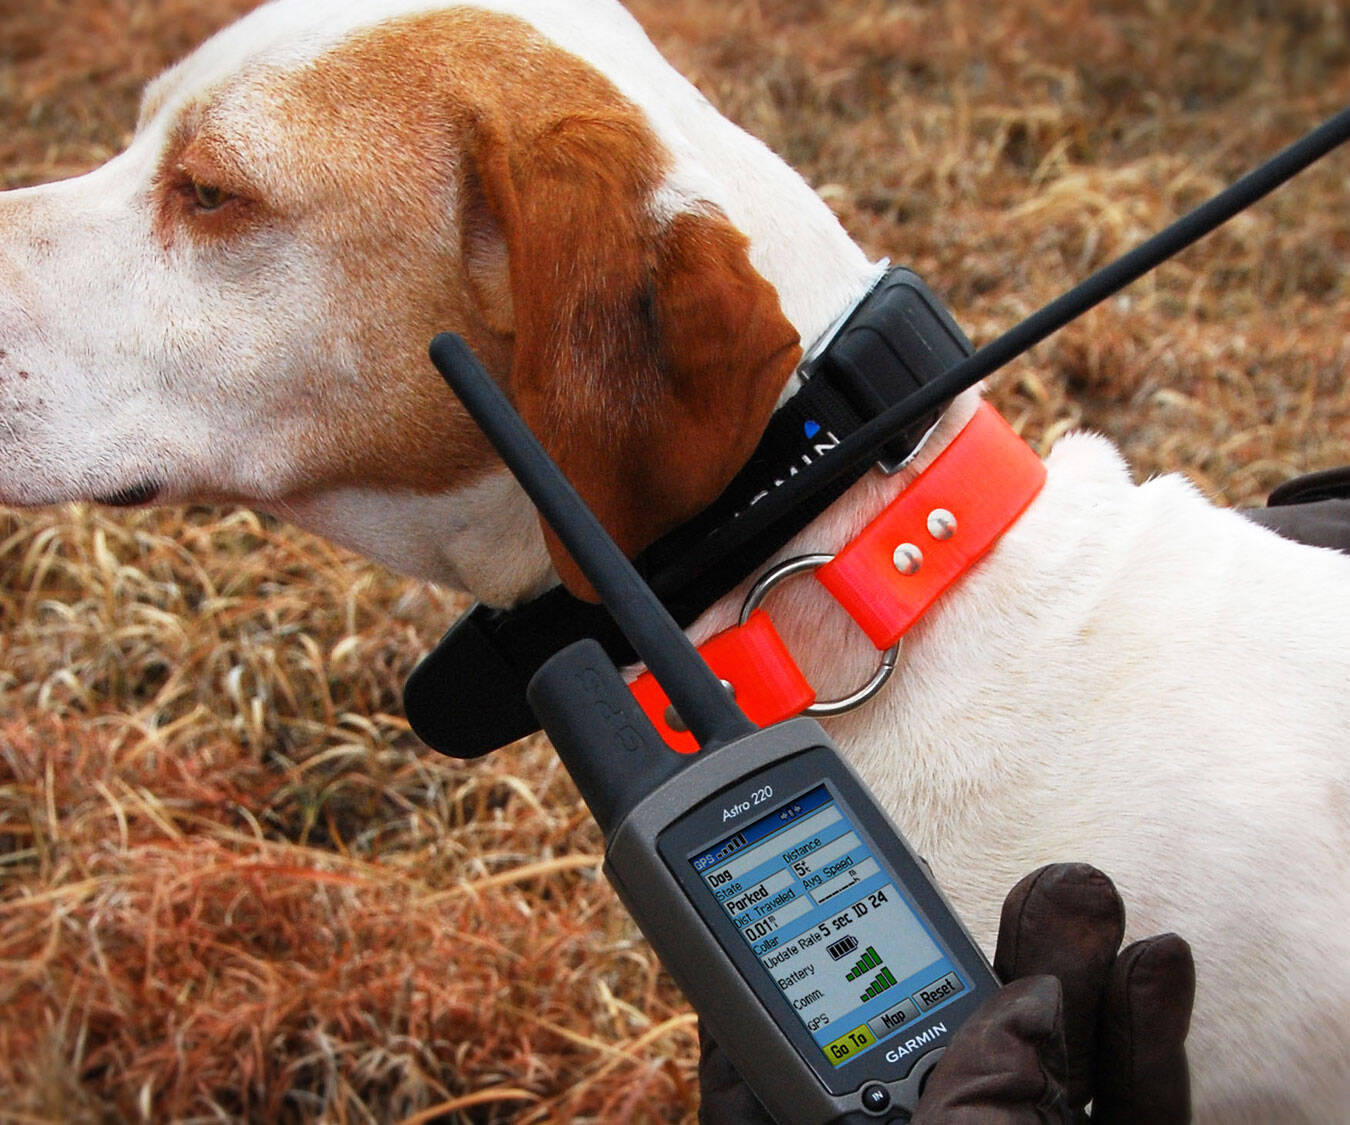 GPS Dog Collar - coolthings.us